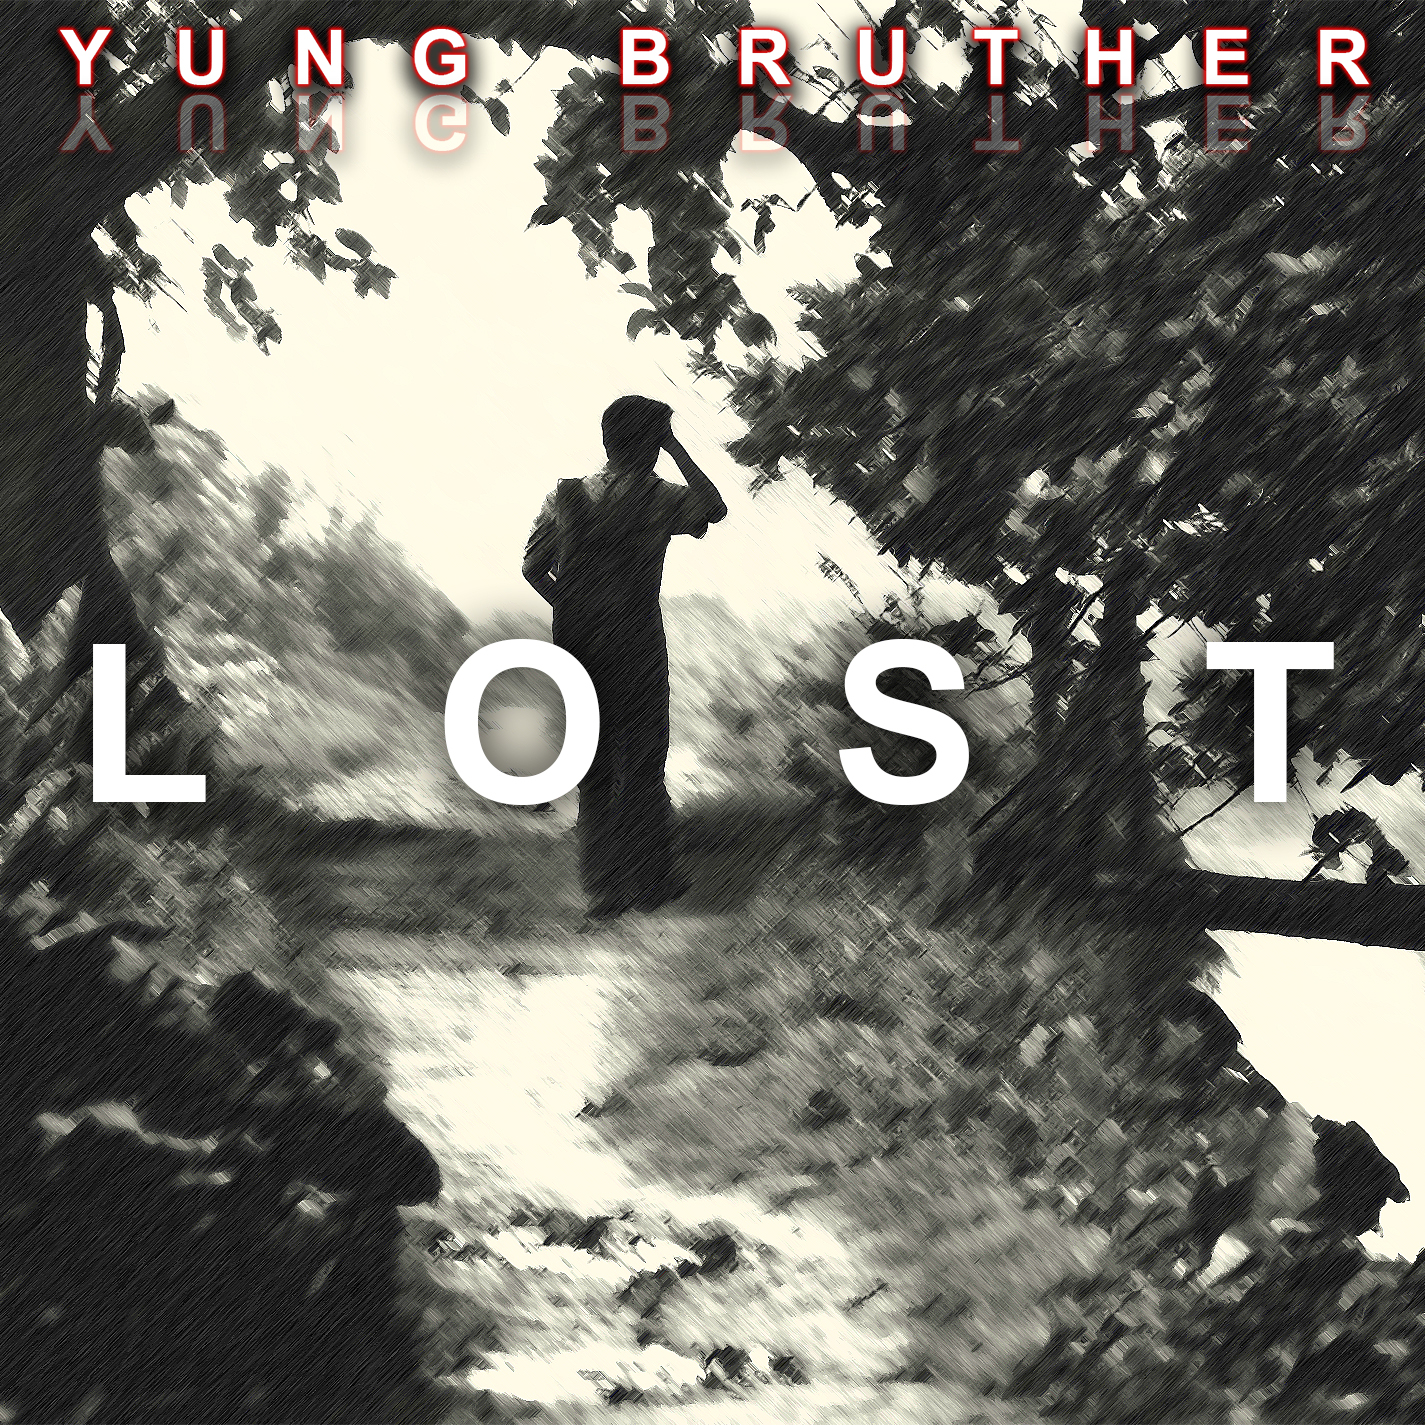 Yung Bruther - Lost